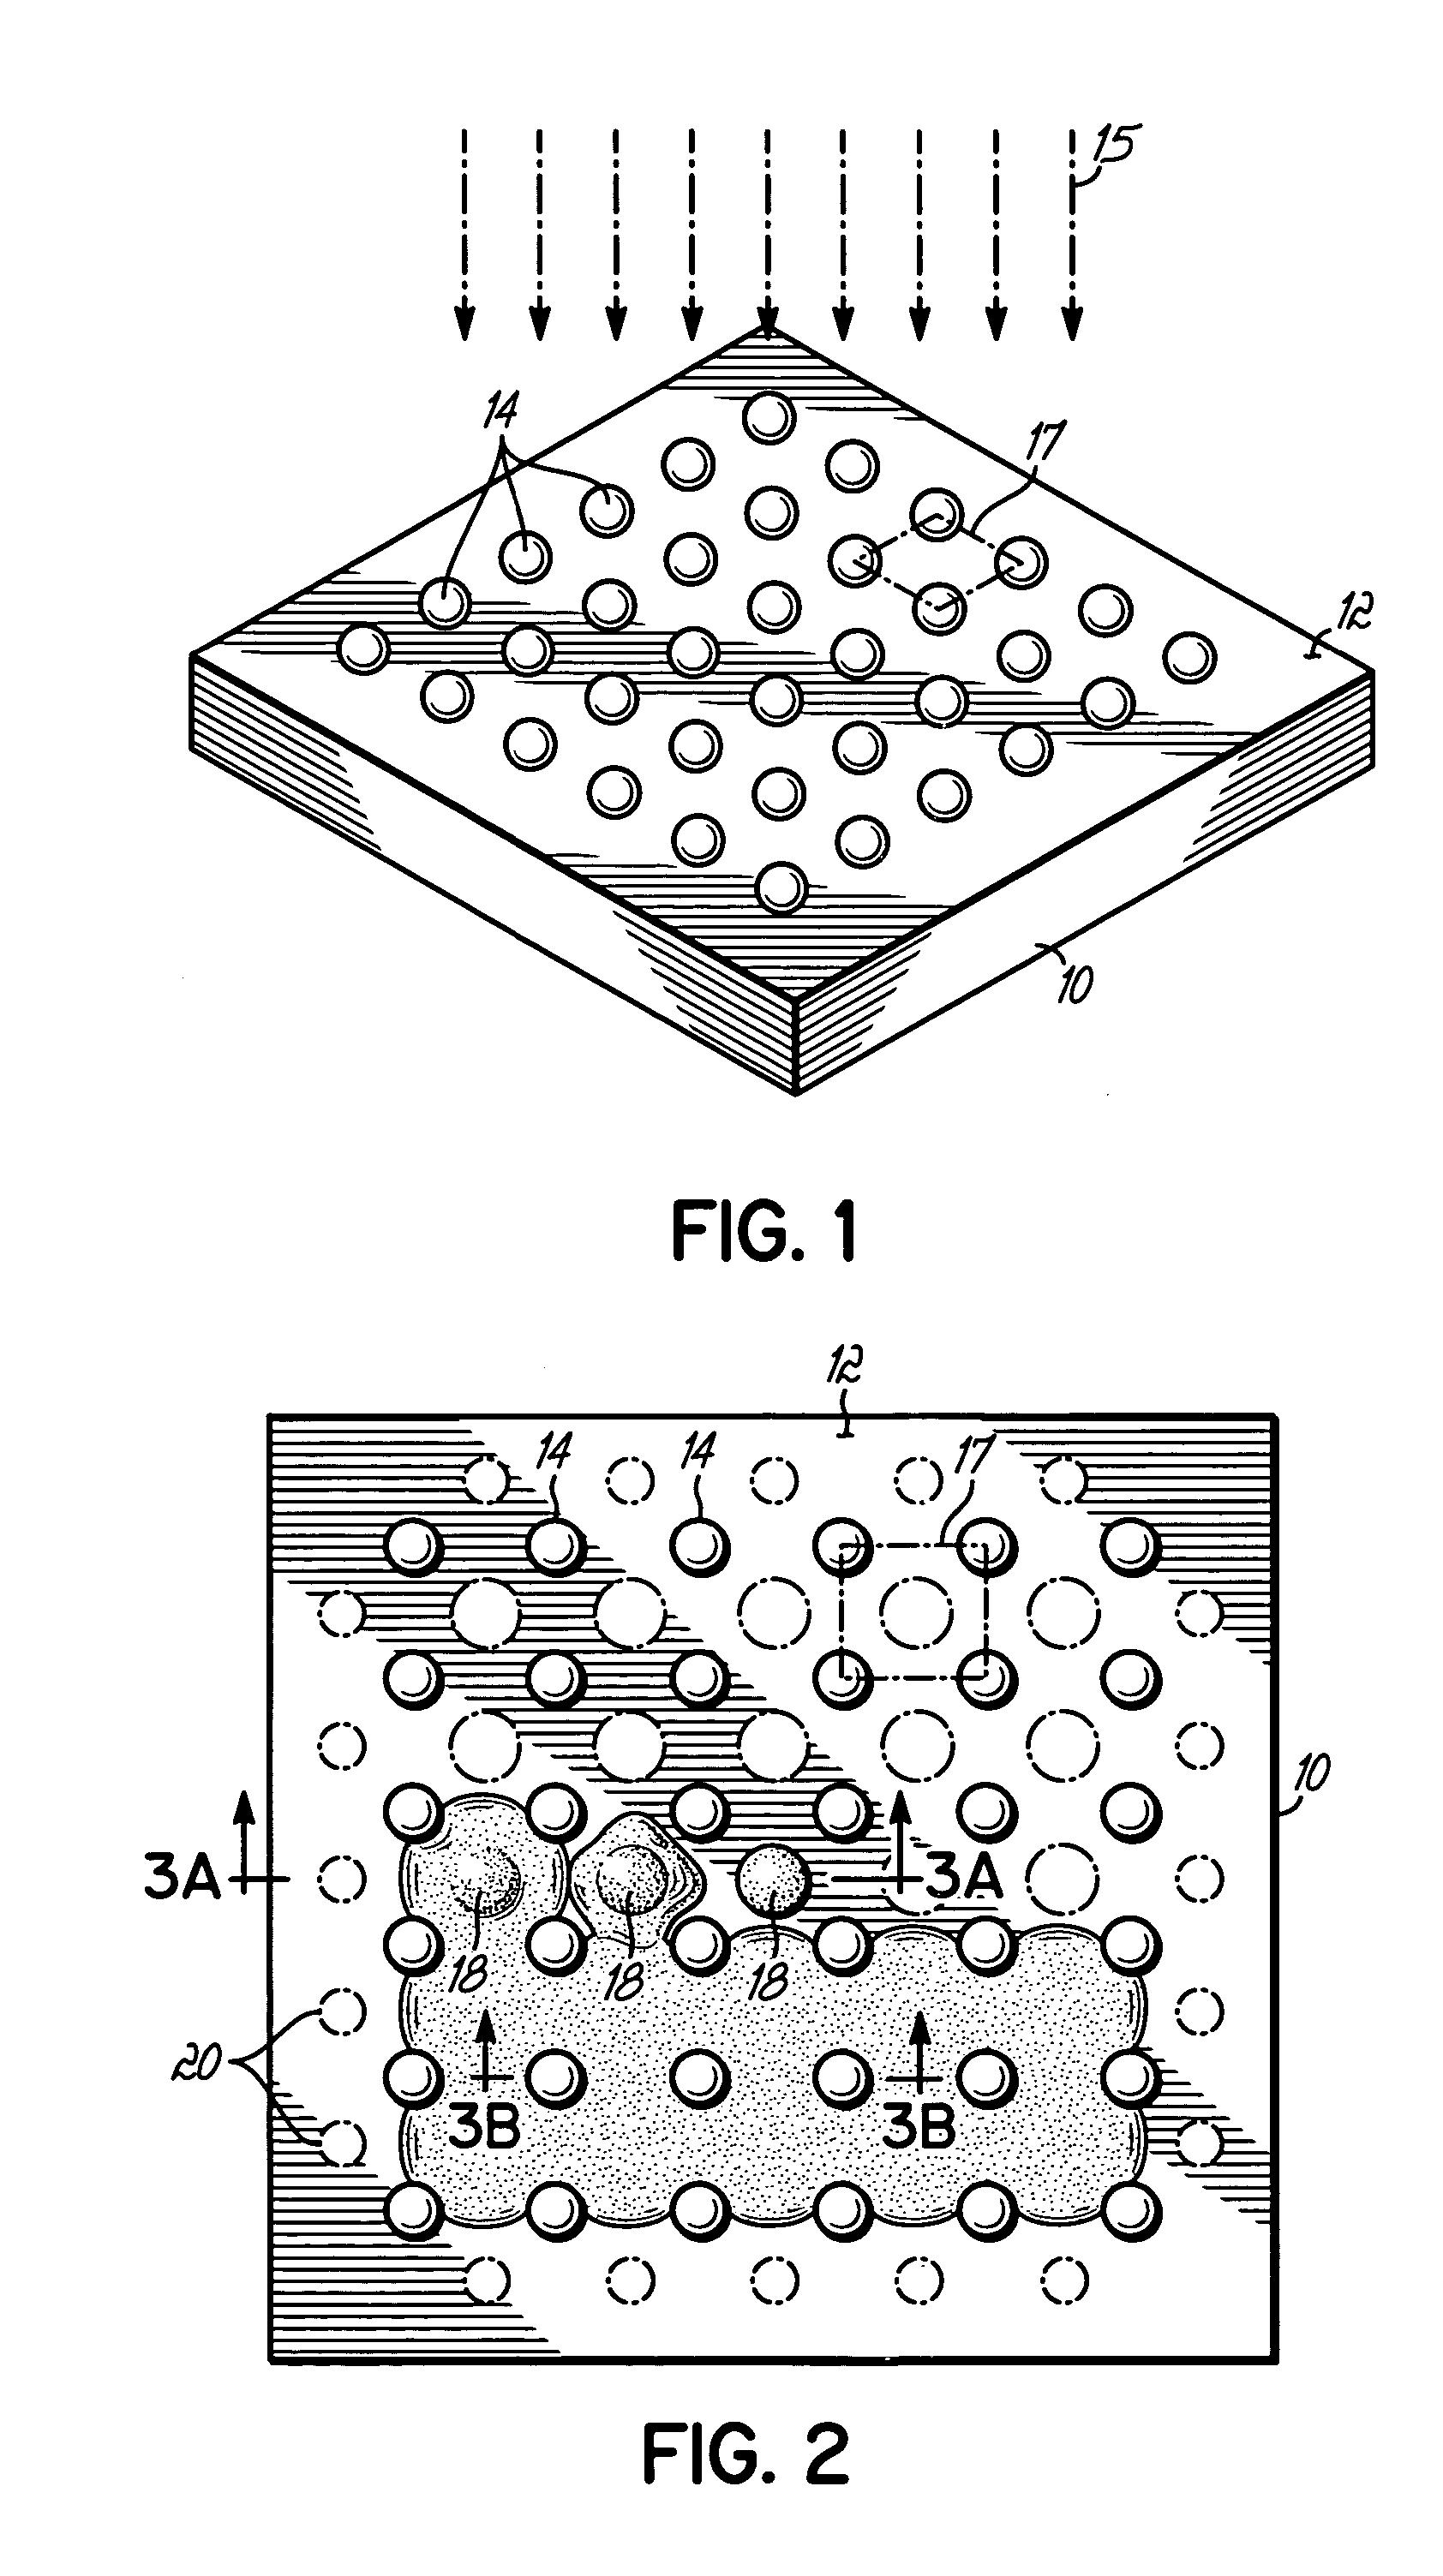 Method for preapplying a viscous material to strengthen solder connections in microelectronic packaging and microelectronic packages formed thereby